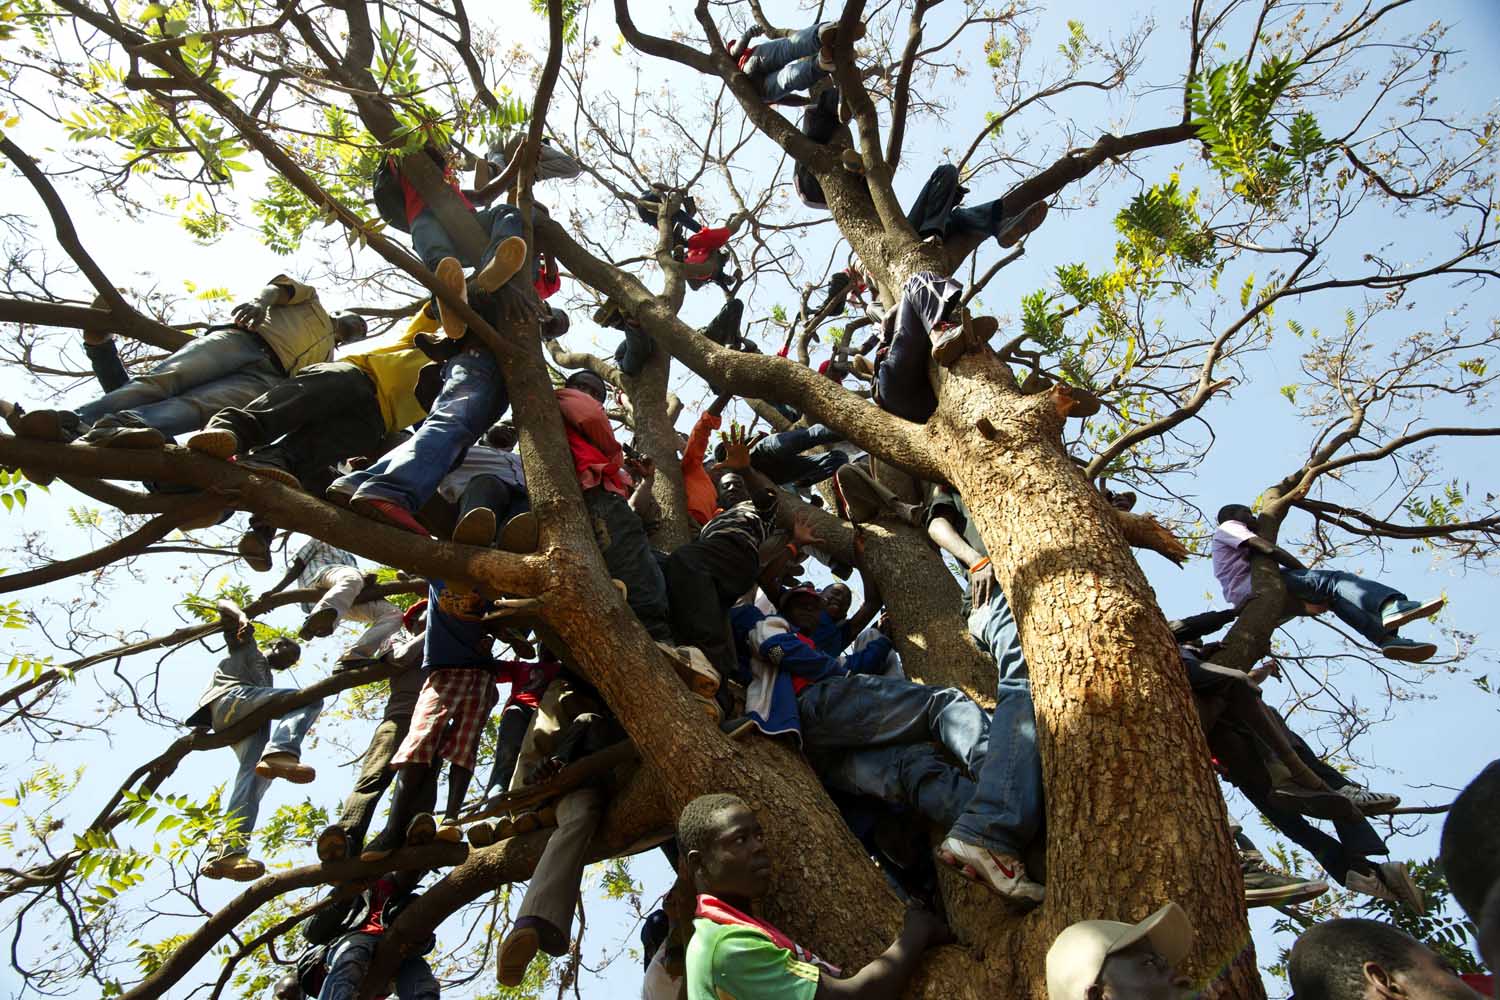 July 29, 2013. Supporters of Zimbabwe's Prime Minister climb up a tree during an election rally in Harare.